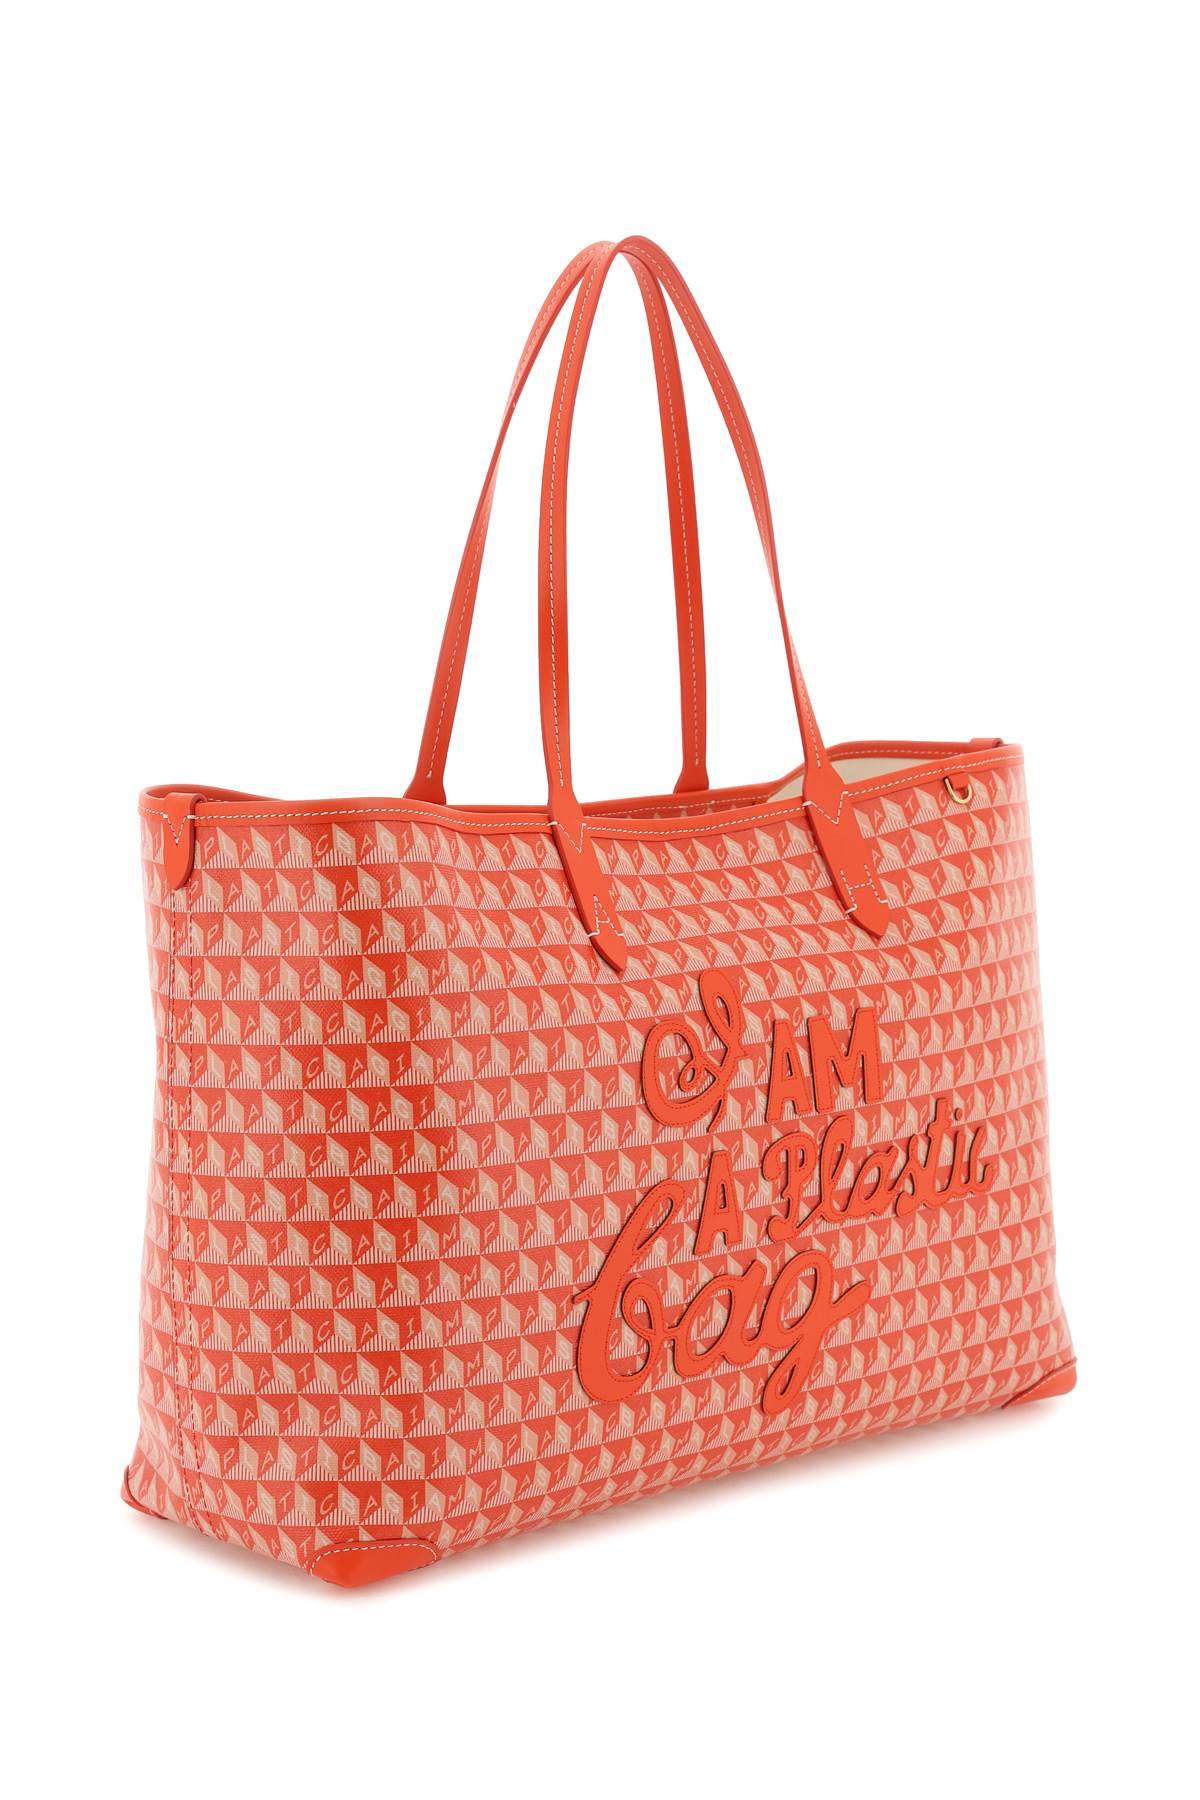 Anya Hindmarch 'i Am A Plastic Bag' Tote Bag in Red | Lyst